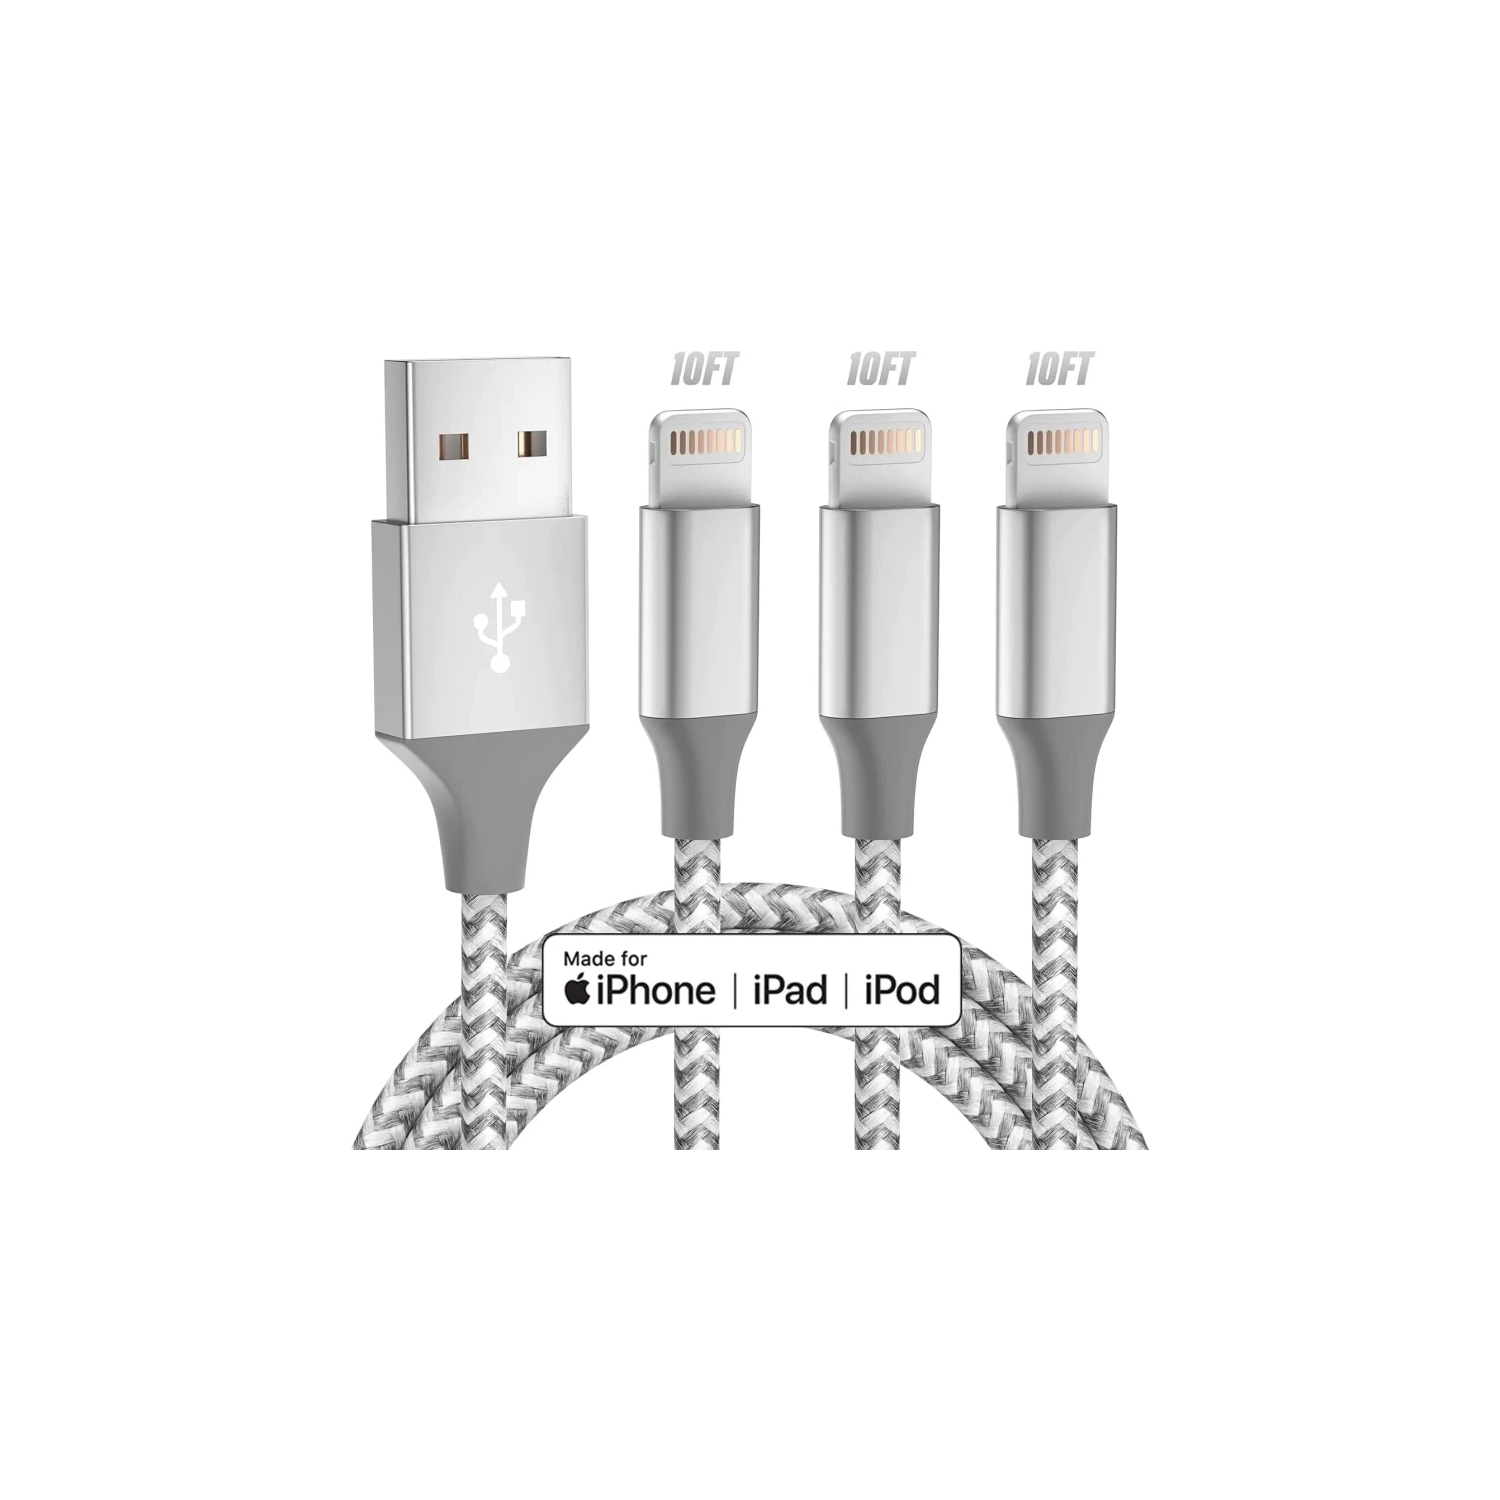 Apple MFi Certified iPhone Charger - 3-Pack 10FT Long Lightning Cable for Fast Charging & High-Speed Data Sync. Compatible with iPhone 13/12/11 Pro Max/XS MAX/XR/XS/X/8/7/Plus/6S.